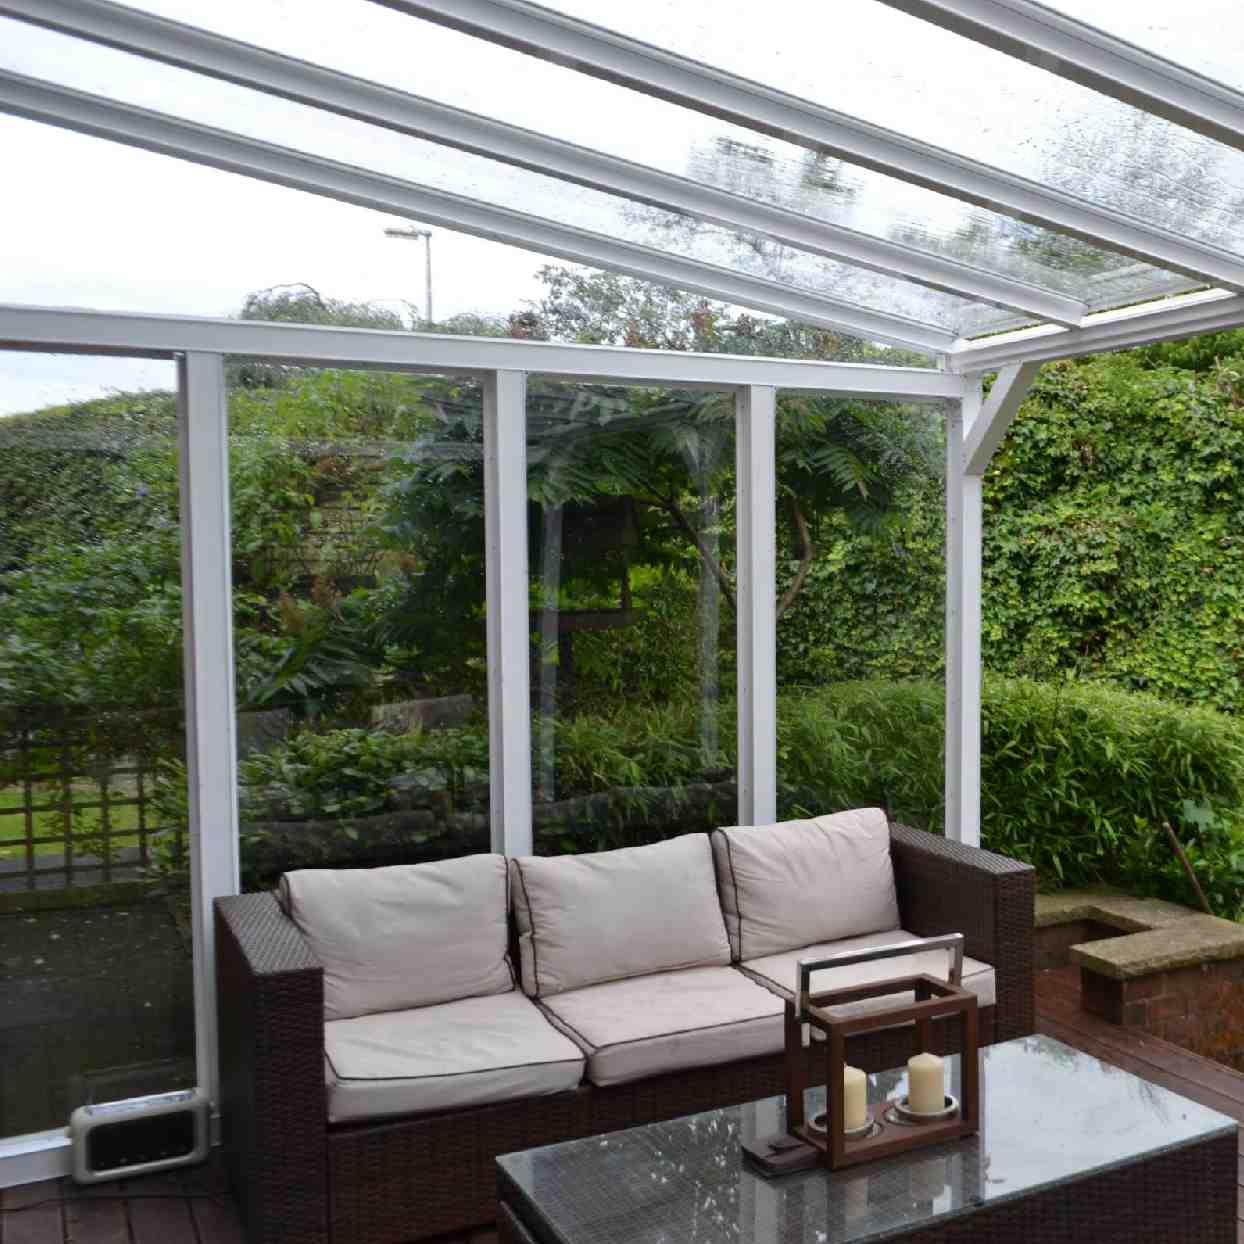 Buy Omega Verandah White with 16mm Polycarbonate Glazing - 2.1m (W) x 2.5m (P), (2) Supporting Posts online today